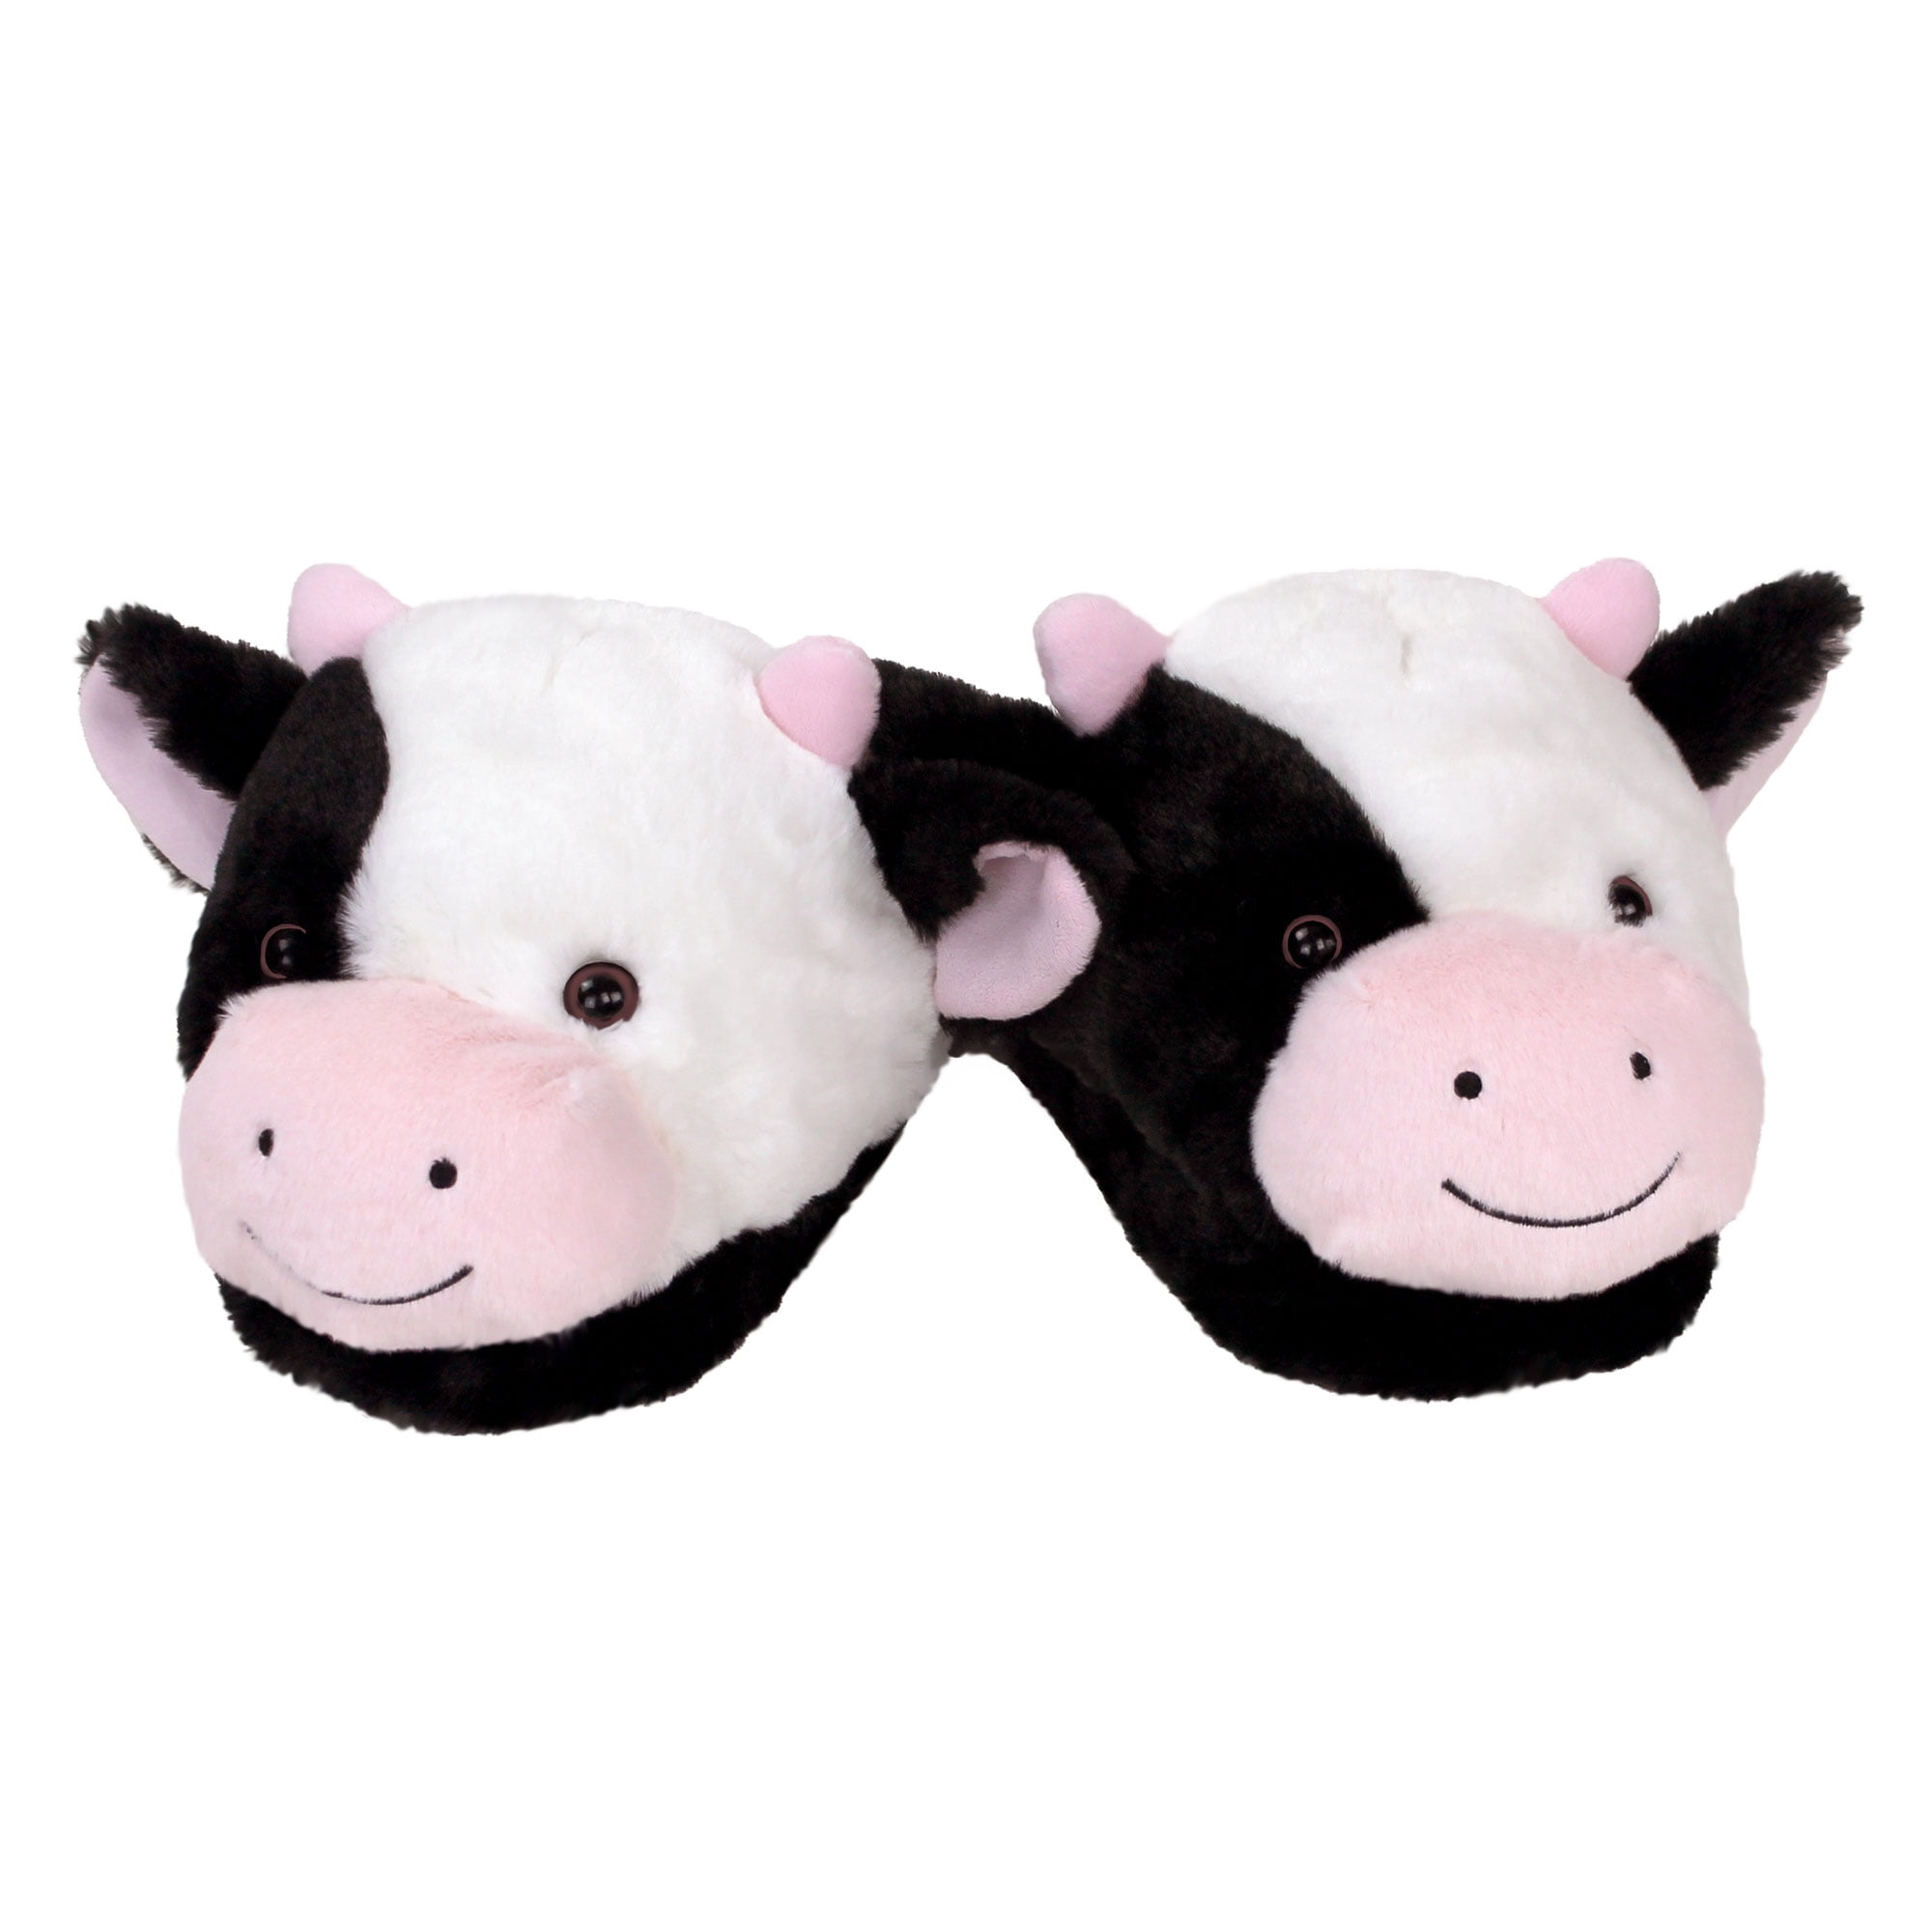 AnimalSlippers - Fuzzy Cow Slippers 